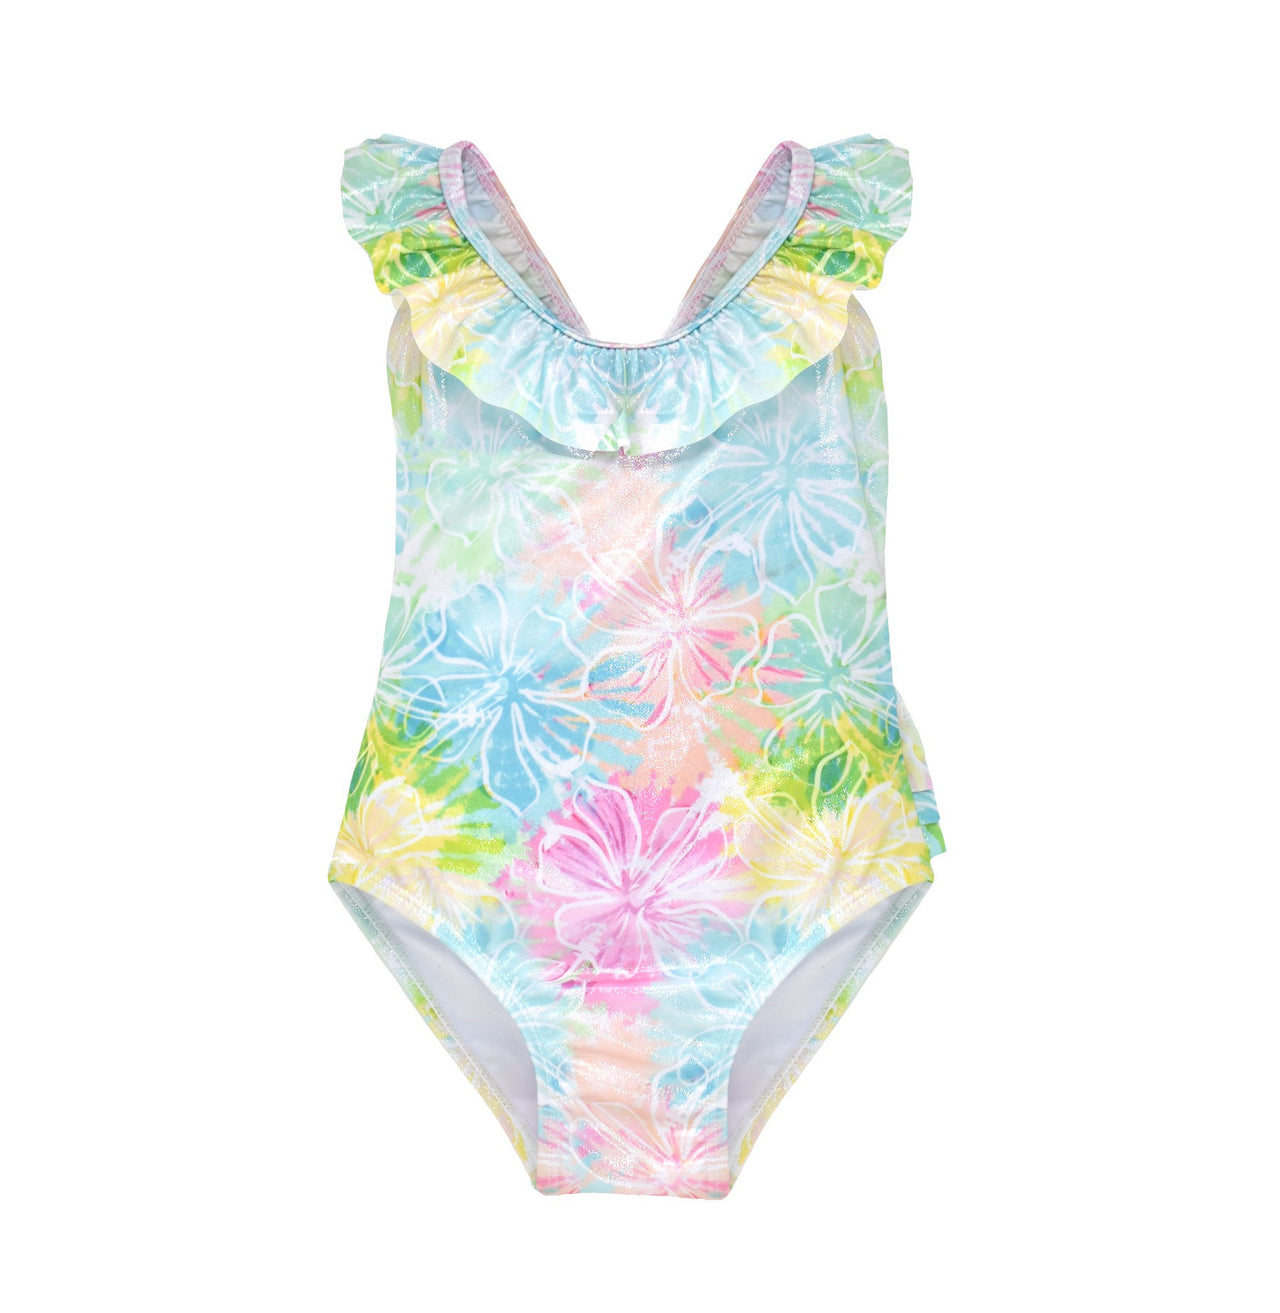 Flap Happy UPF 50 Mindy Crossback Swimsuit Hibiscus Blooms 5012